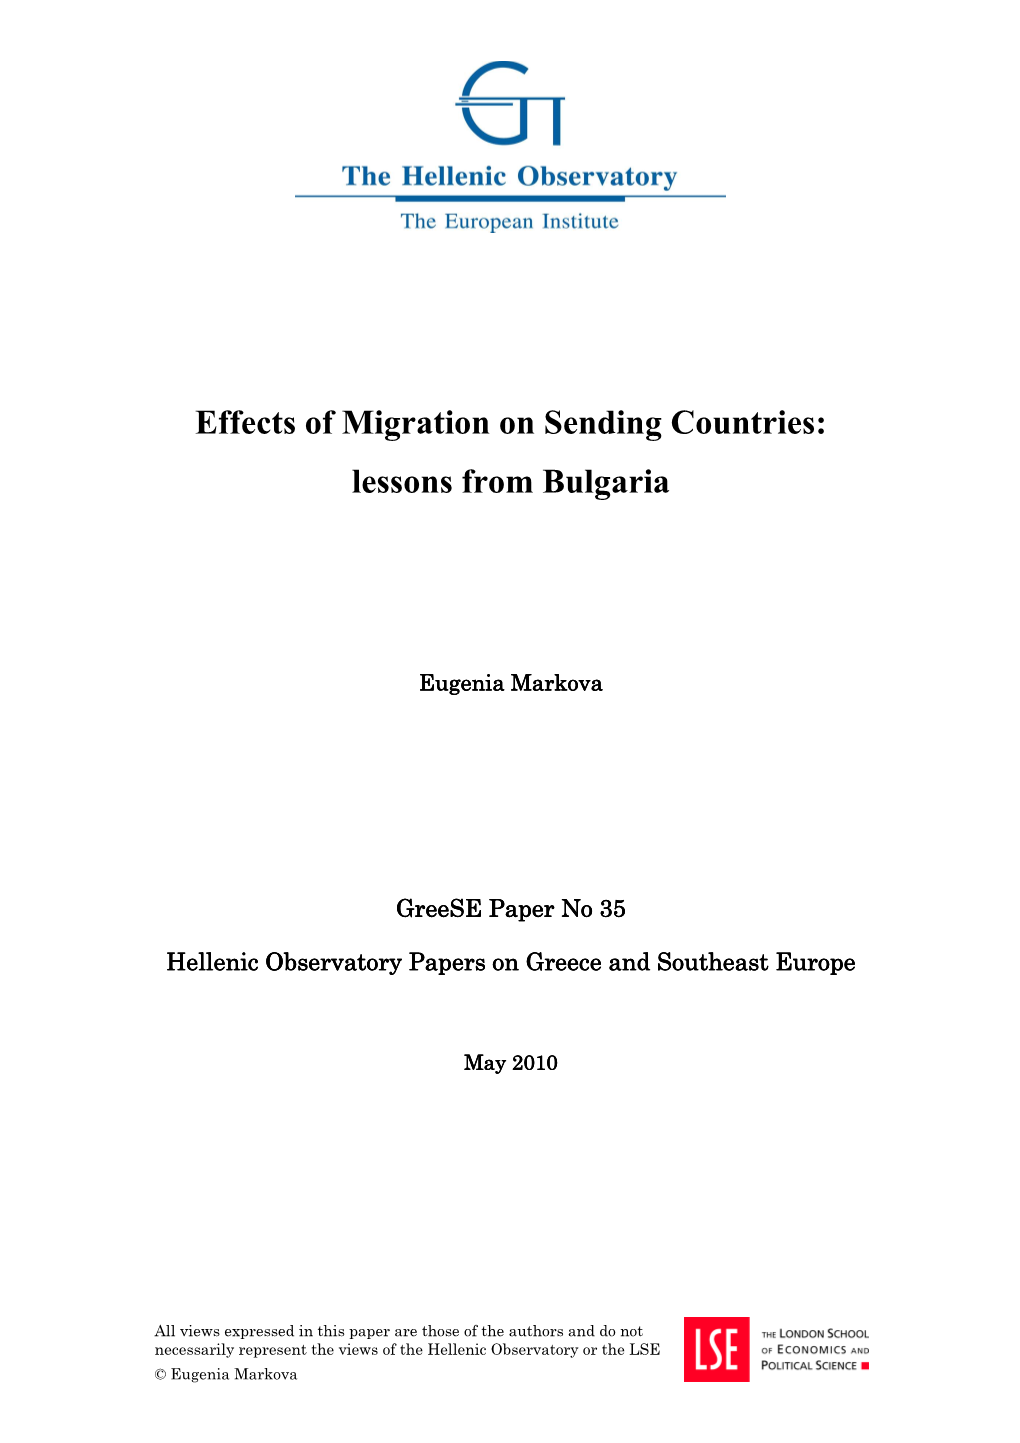 Effects of Migration on Sending Countries: Lessons from Bulgaria